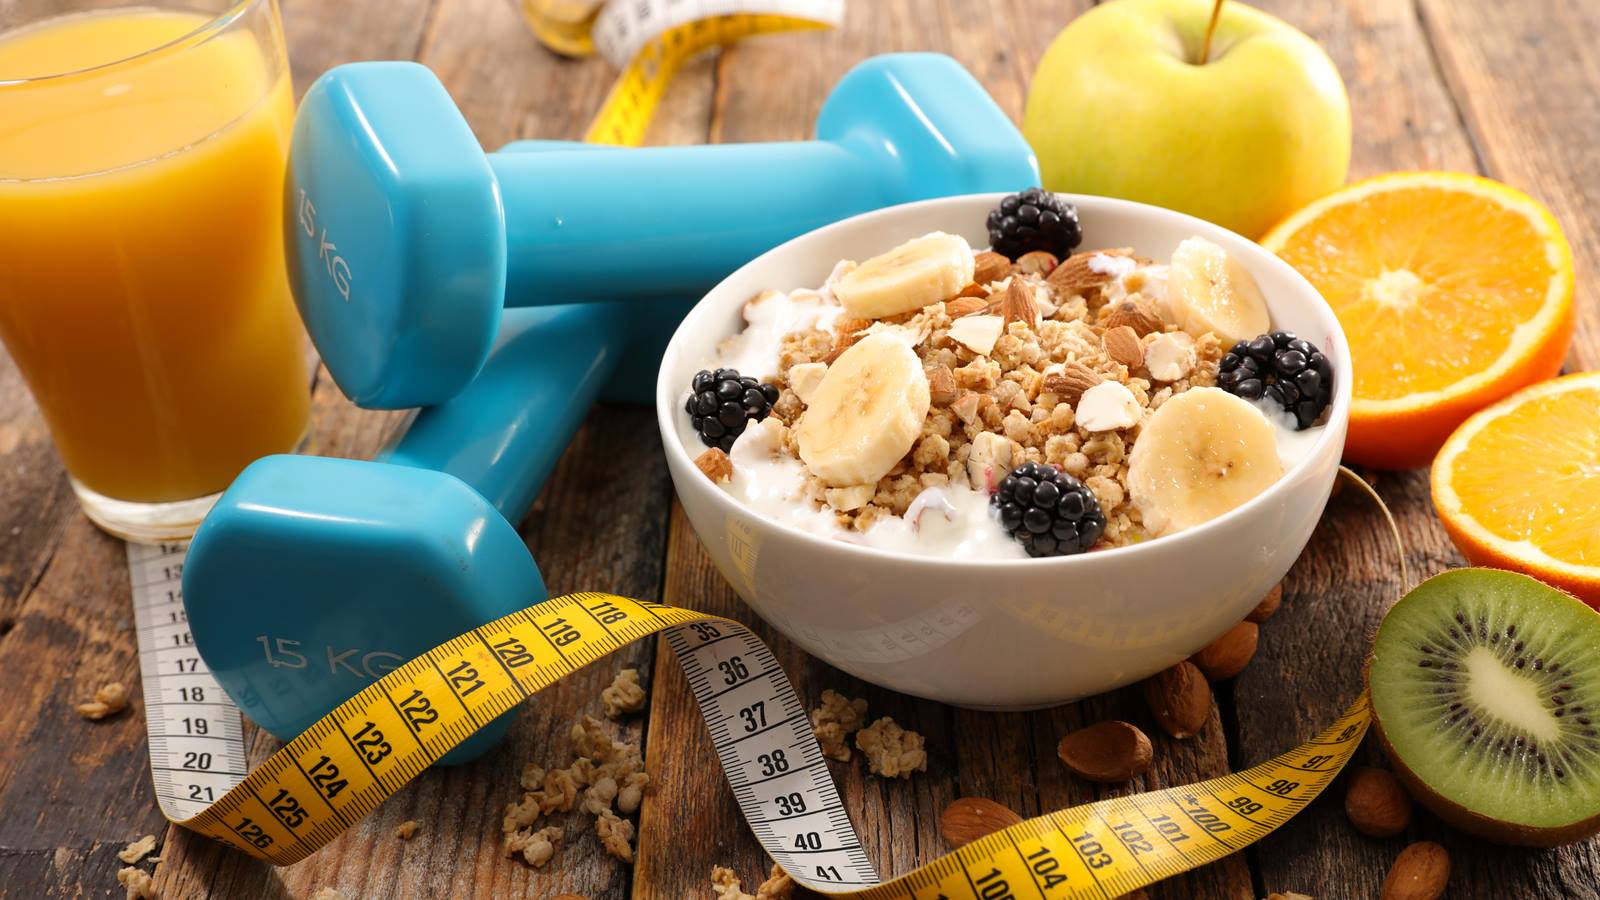 Which Will Help You Lose Weight Faster: Eating Better Or Exercising More?